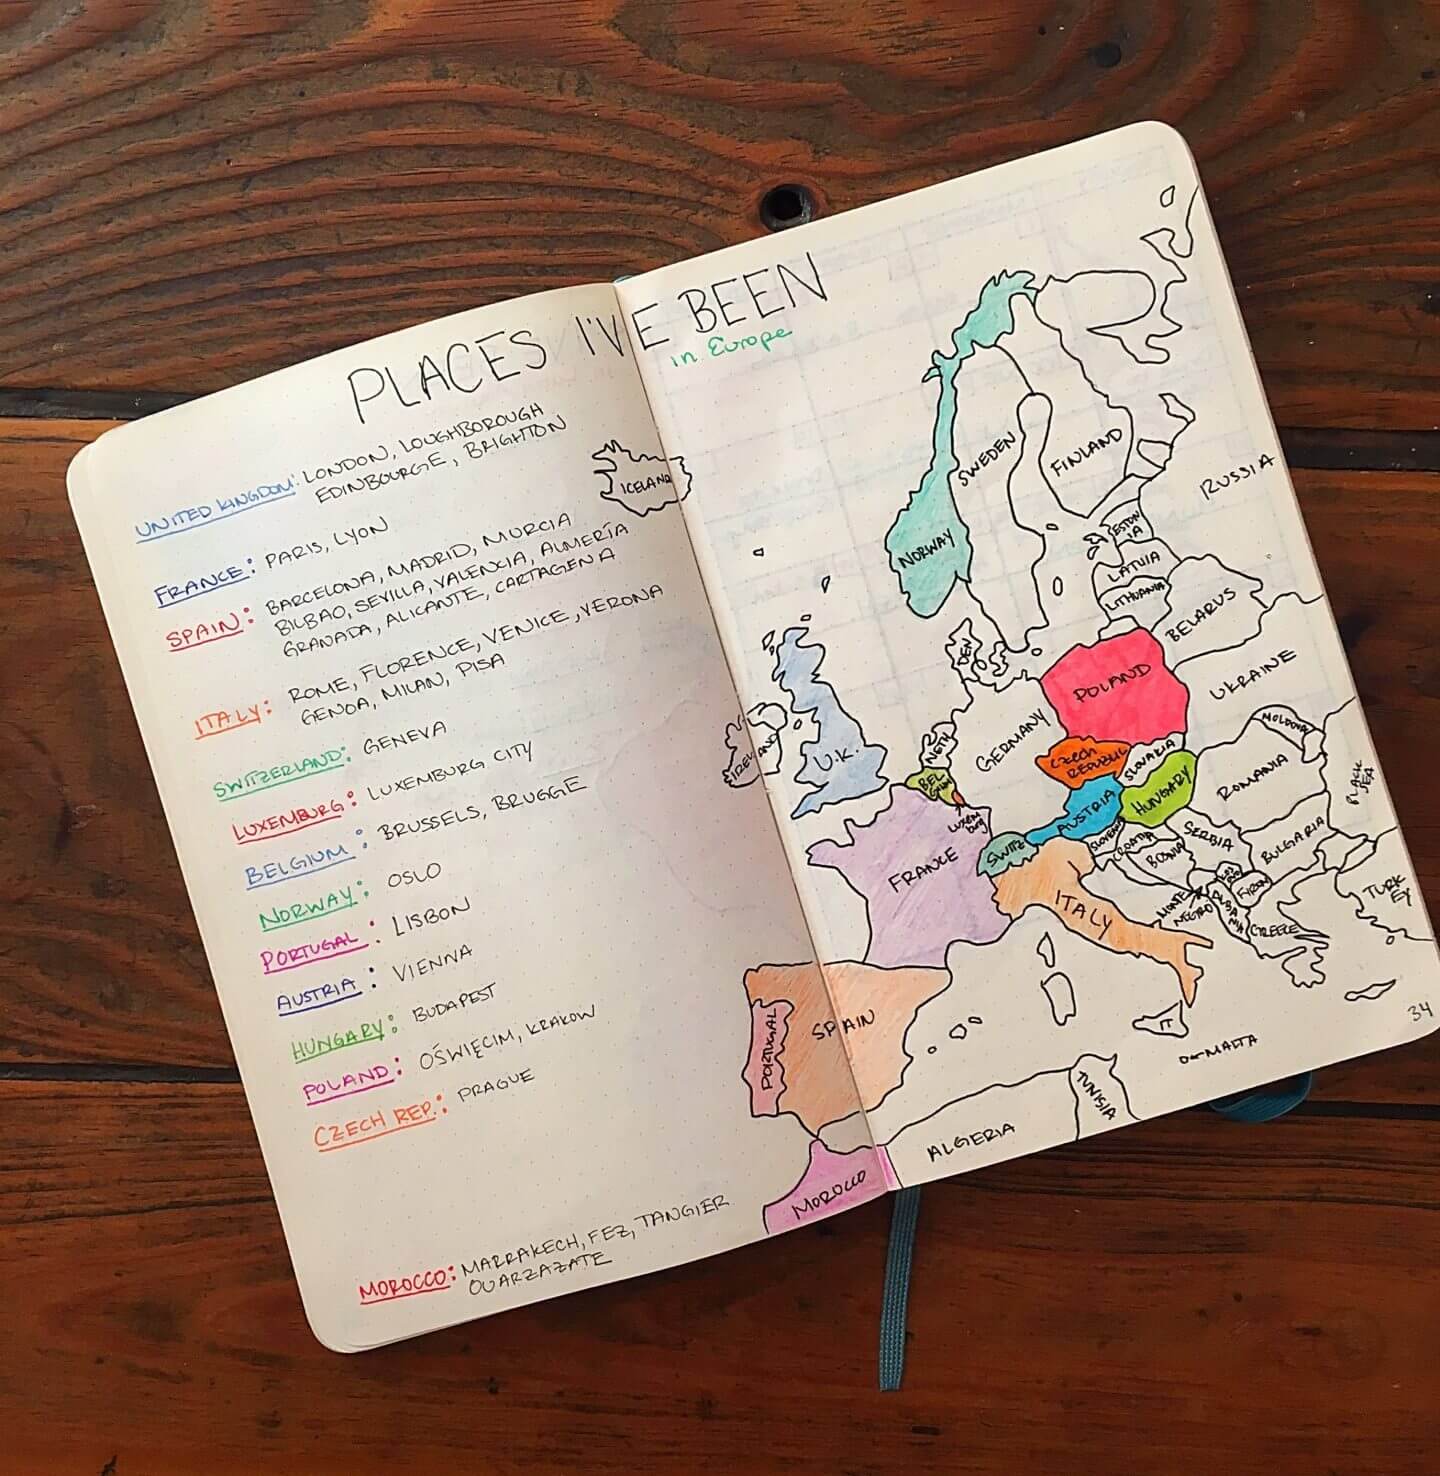 How to Make Maps in your Bullet Journal - Bad with Directions: Learn how to make cute country/world maps in your bullet journal! They are pretty, artsy, and a nice reminder (and inspiration) to travel around the world.